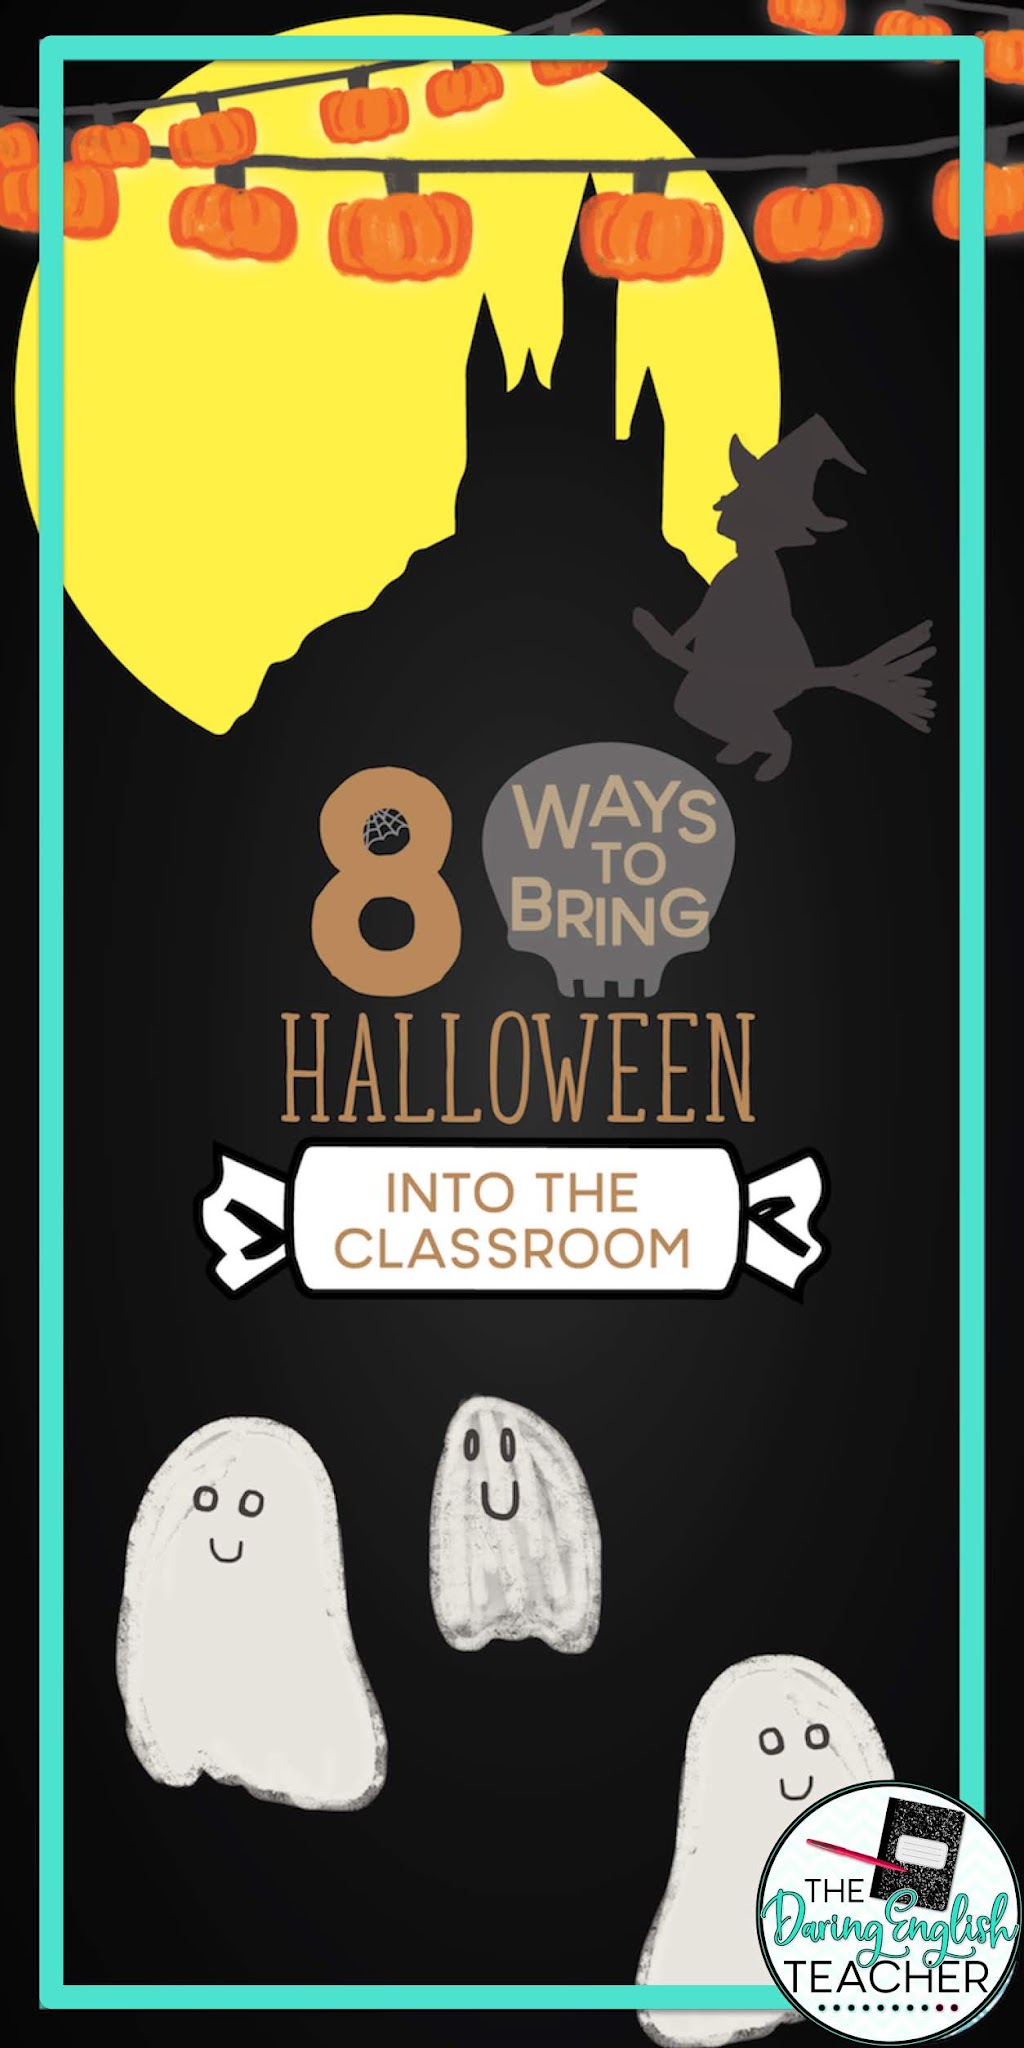 8 Ways to Bring Halloween Into The Classroom